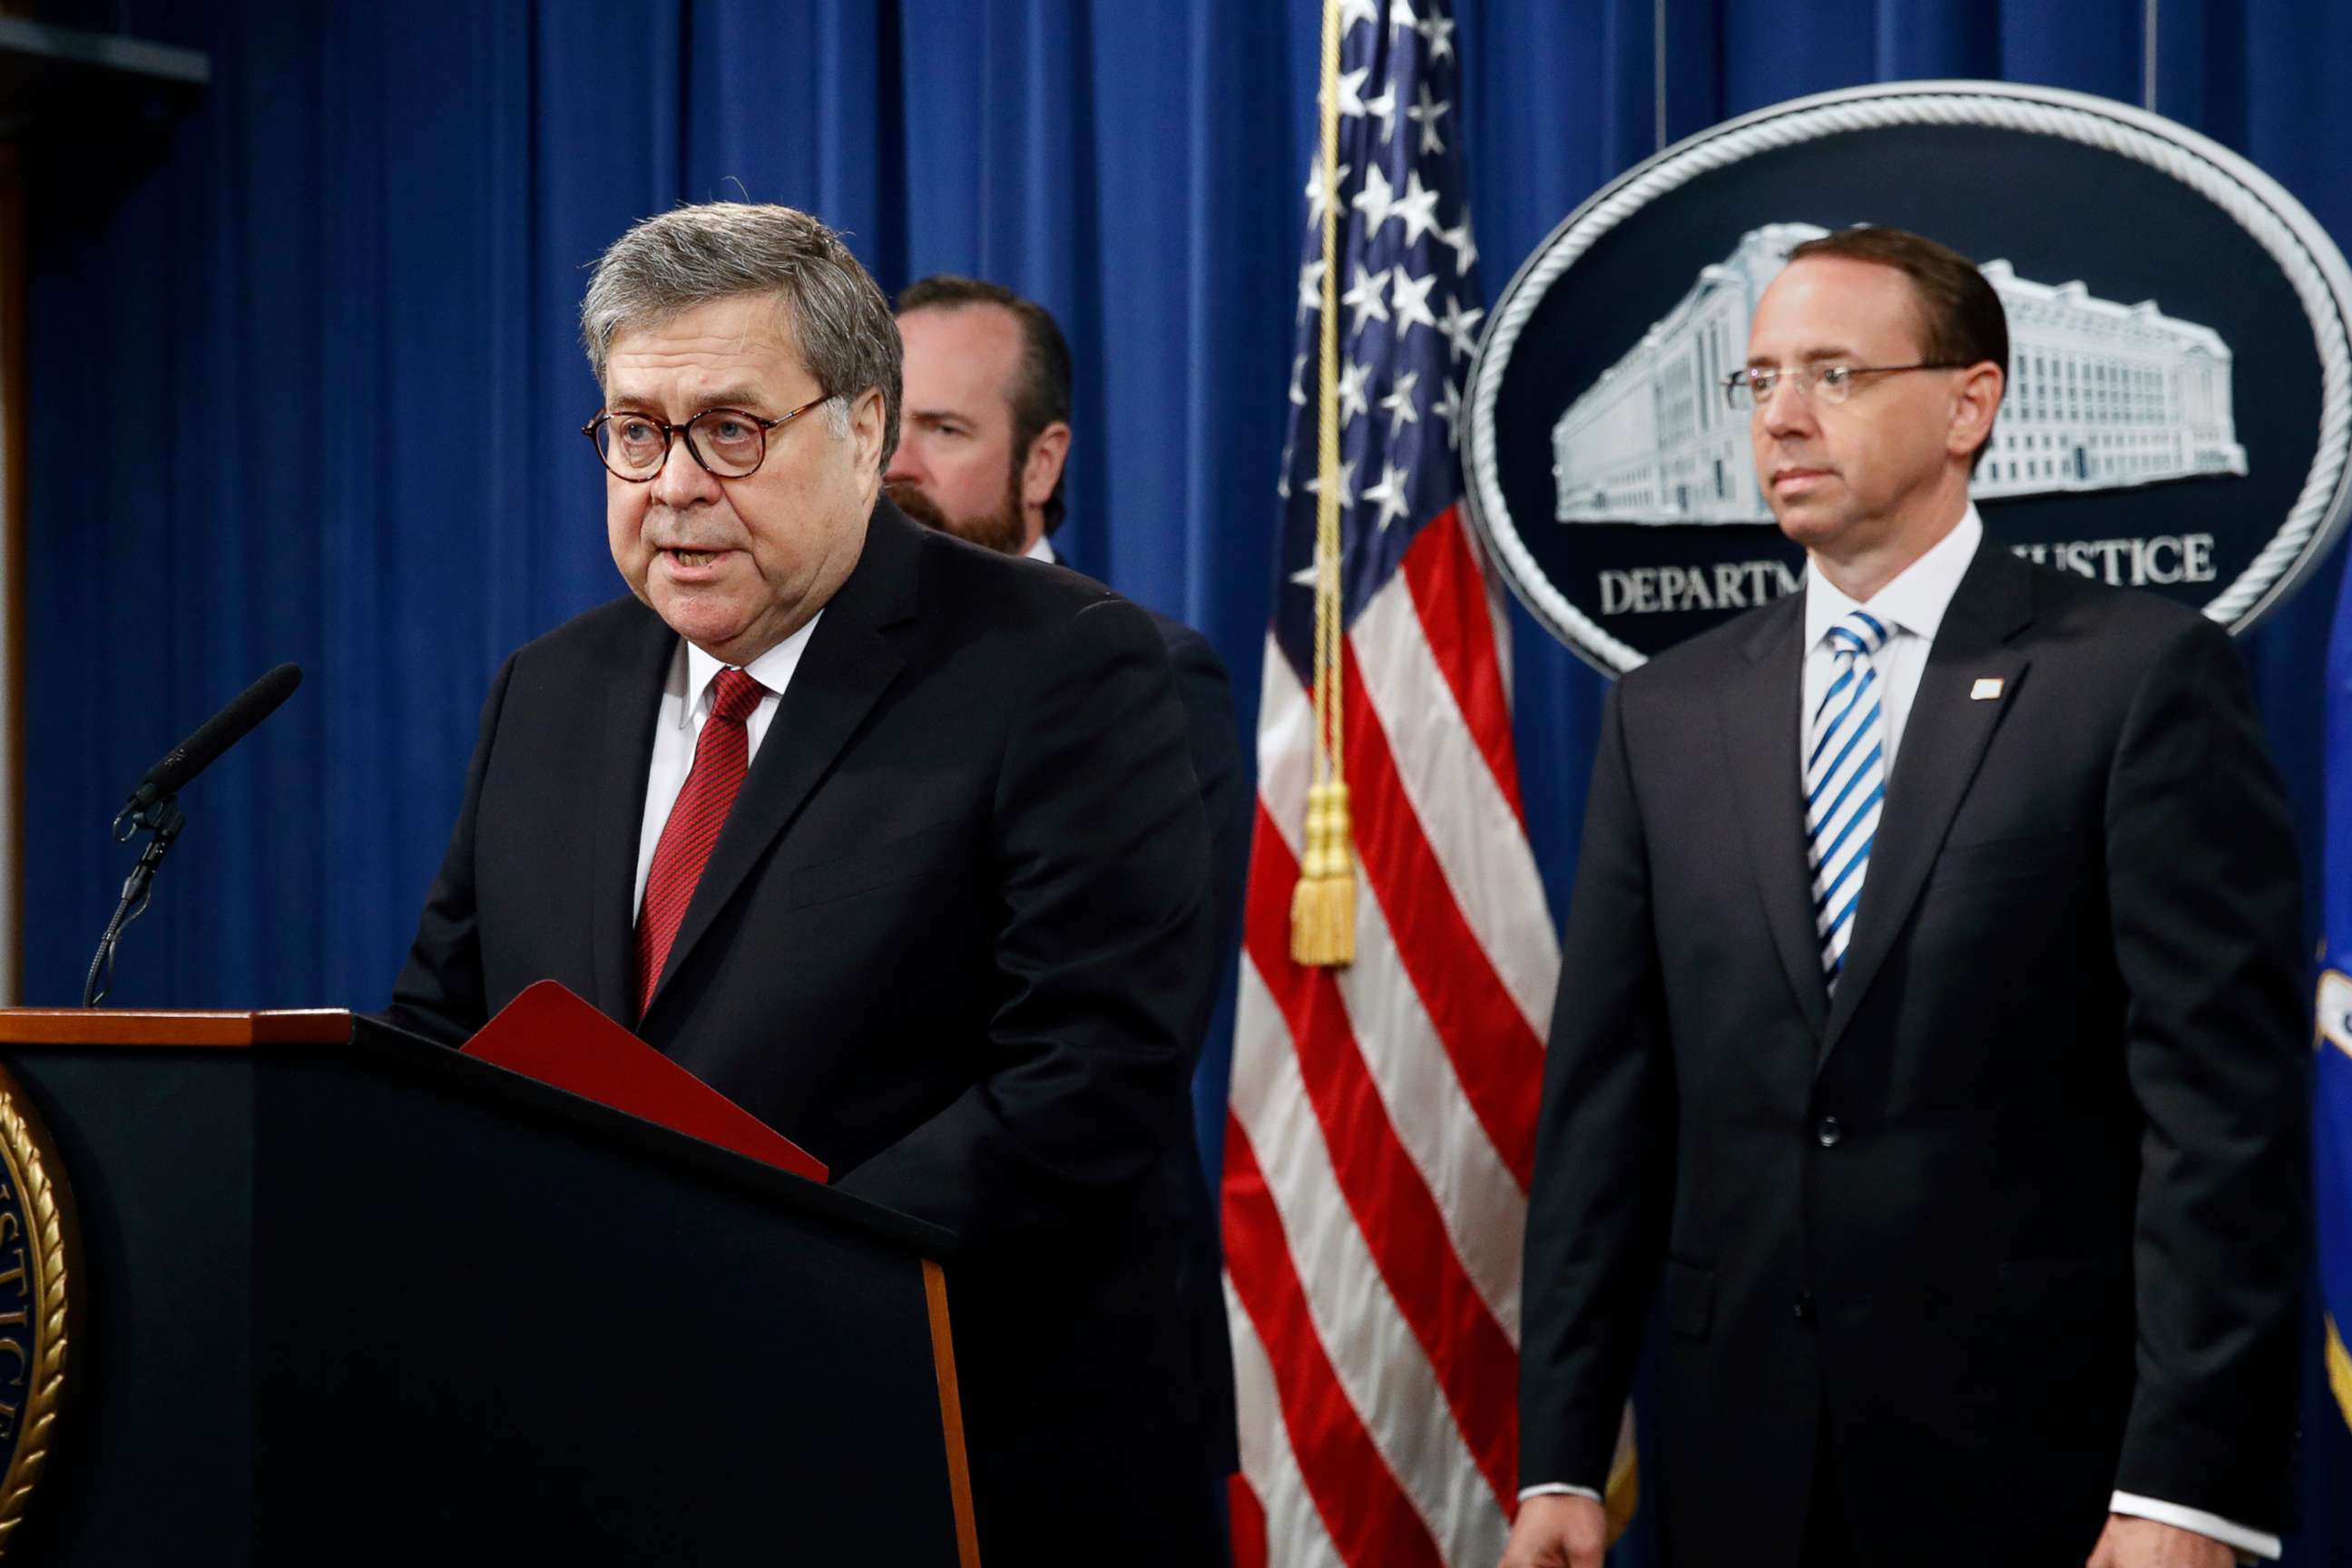 PHOTO: Attorney General William Barr speaks about the release of a redacted version of special counsel Robert Mueller's report during a news conference, April 18, 2019, at the Department of Justice in Washington, D.C.